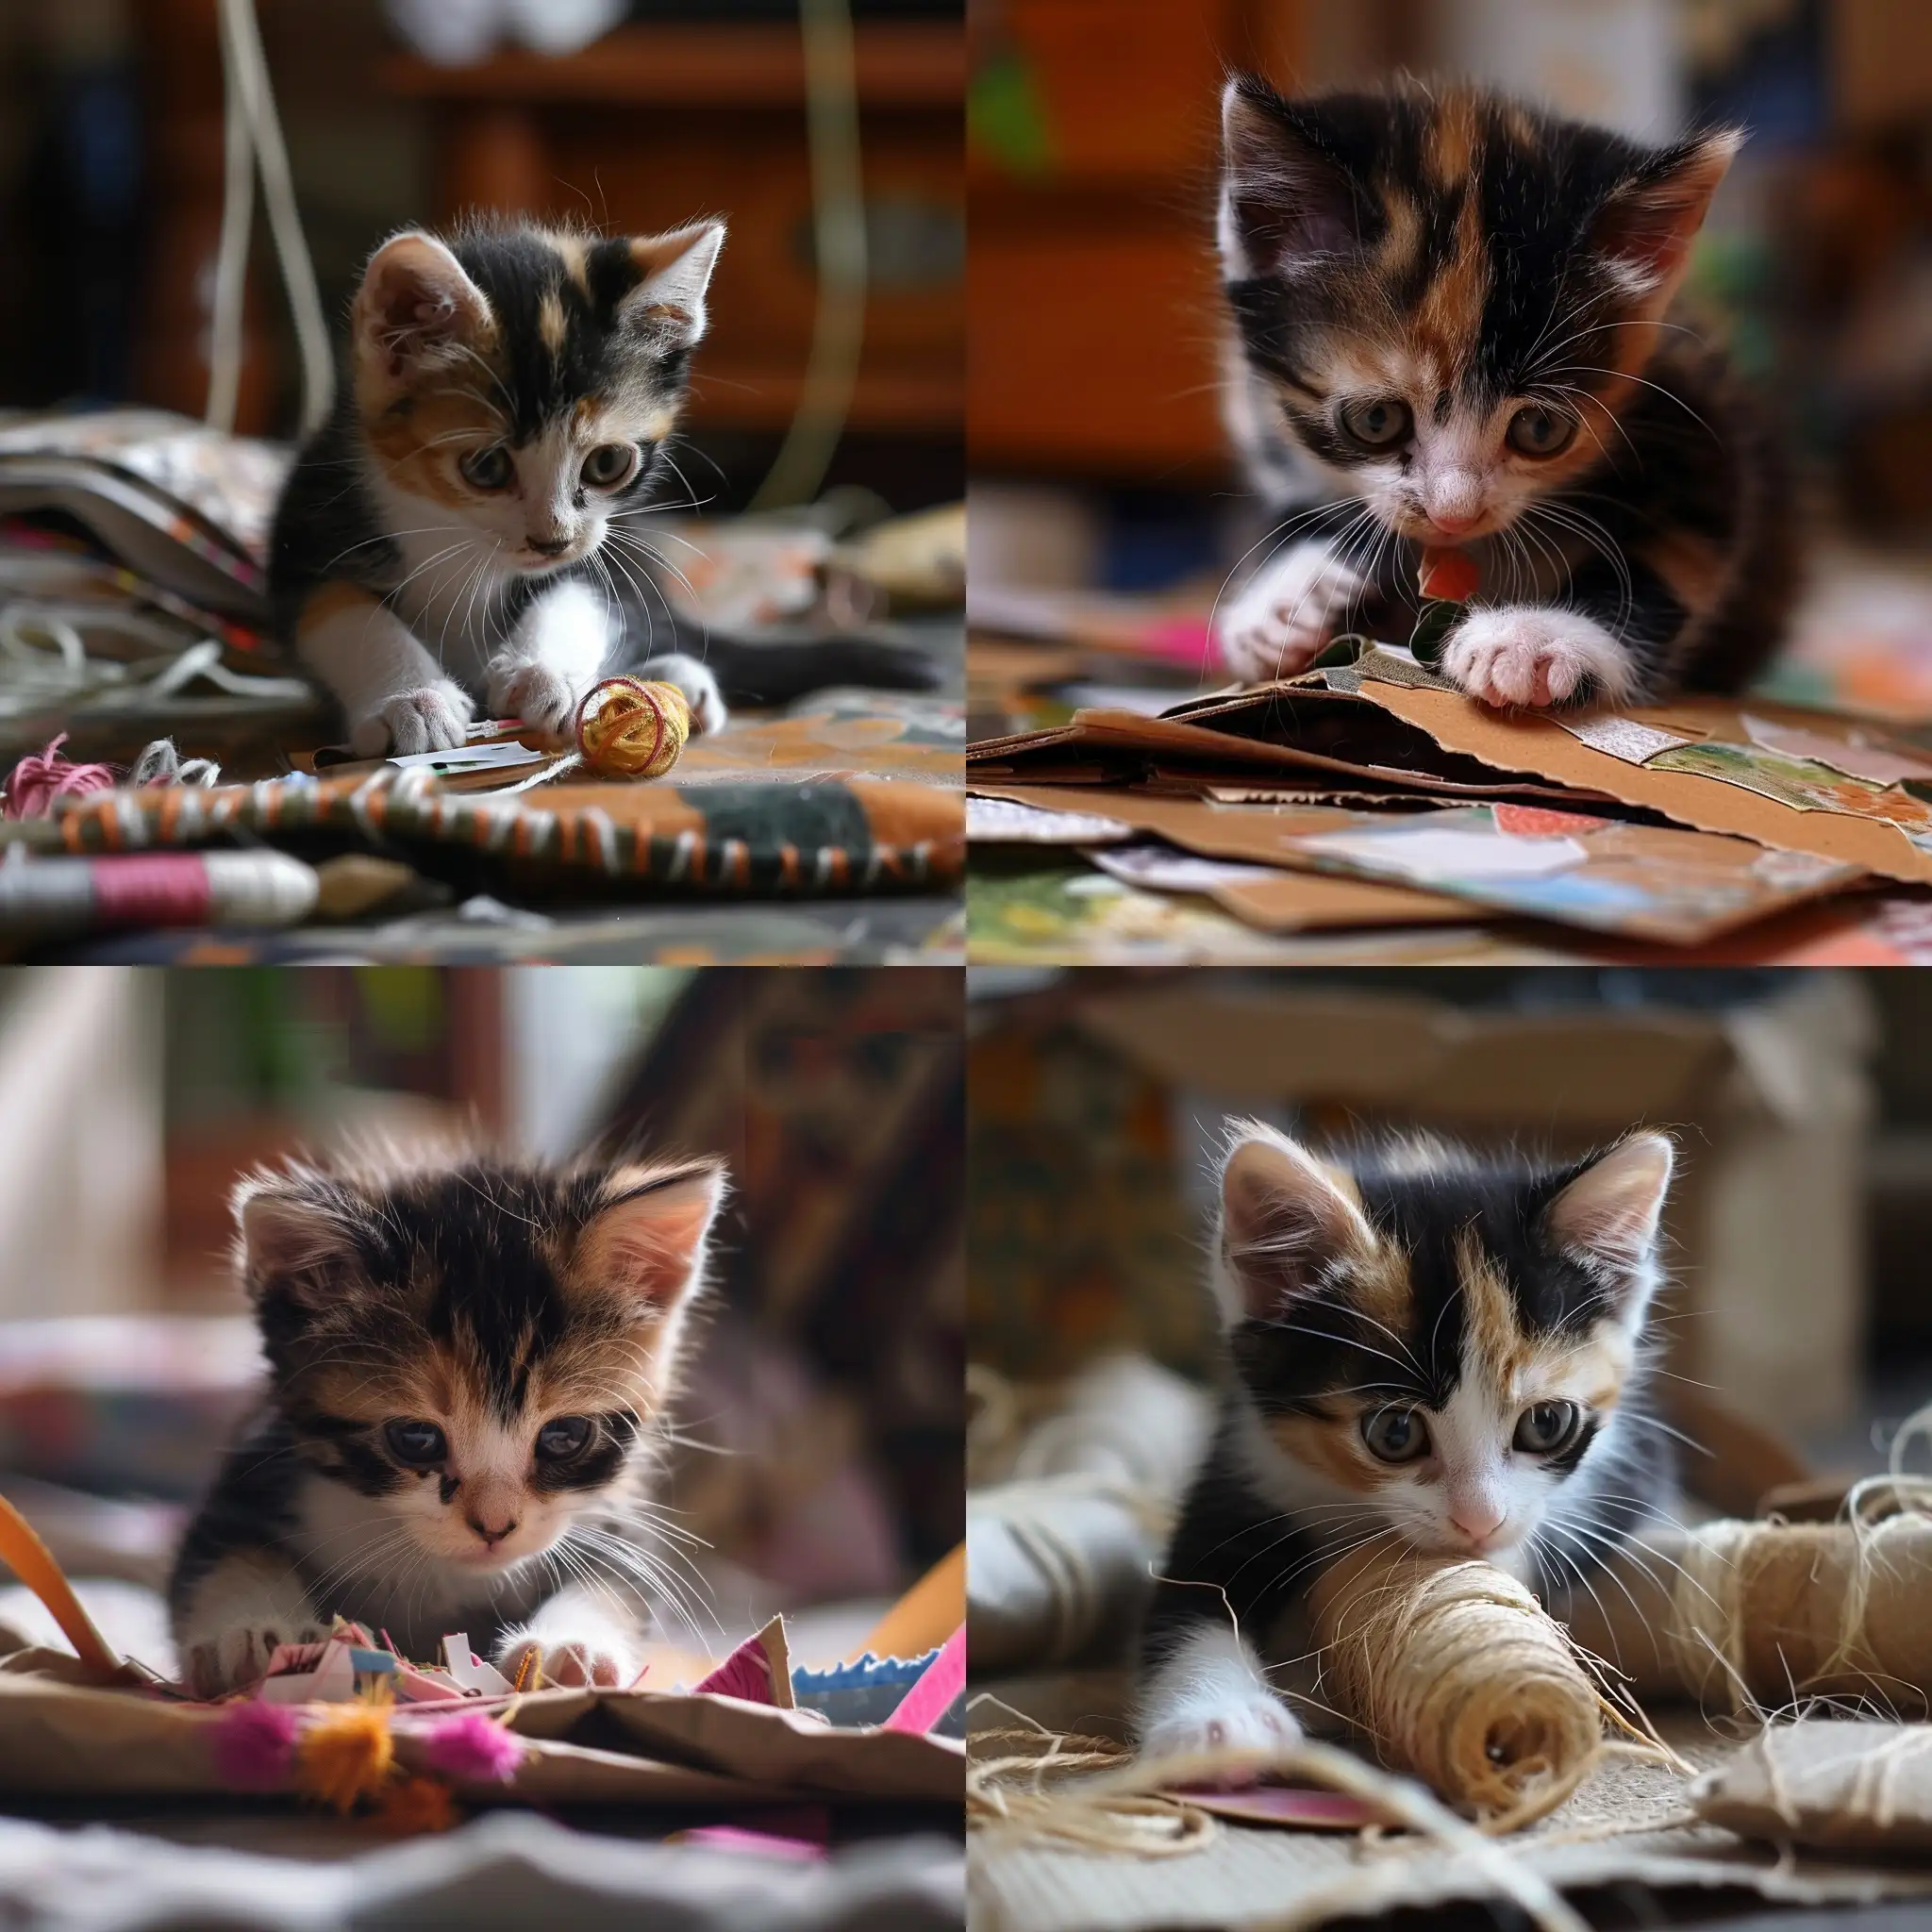 Calico-Kitten-Crafting-Adorable-Feline-Engaged-in-Creative-Project